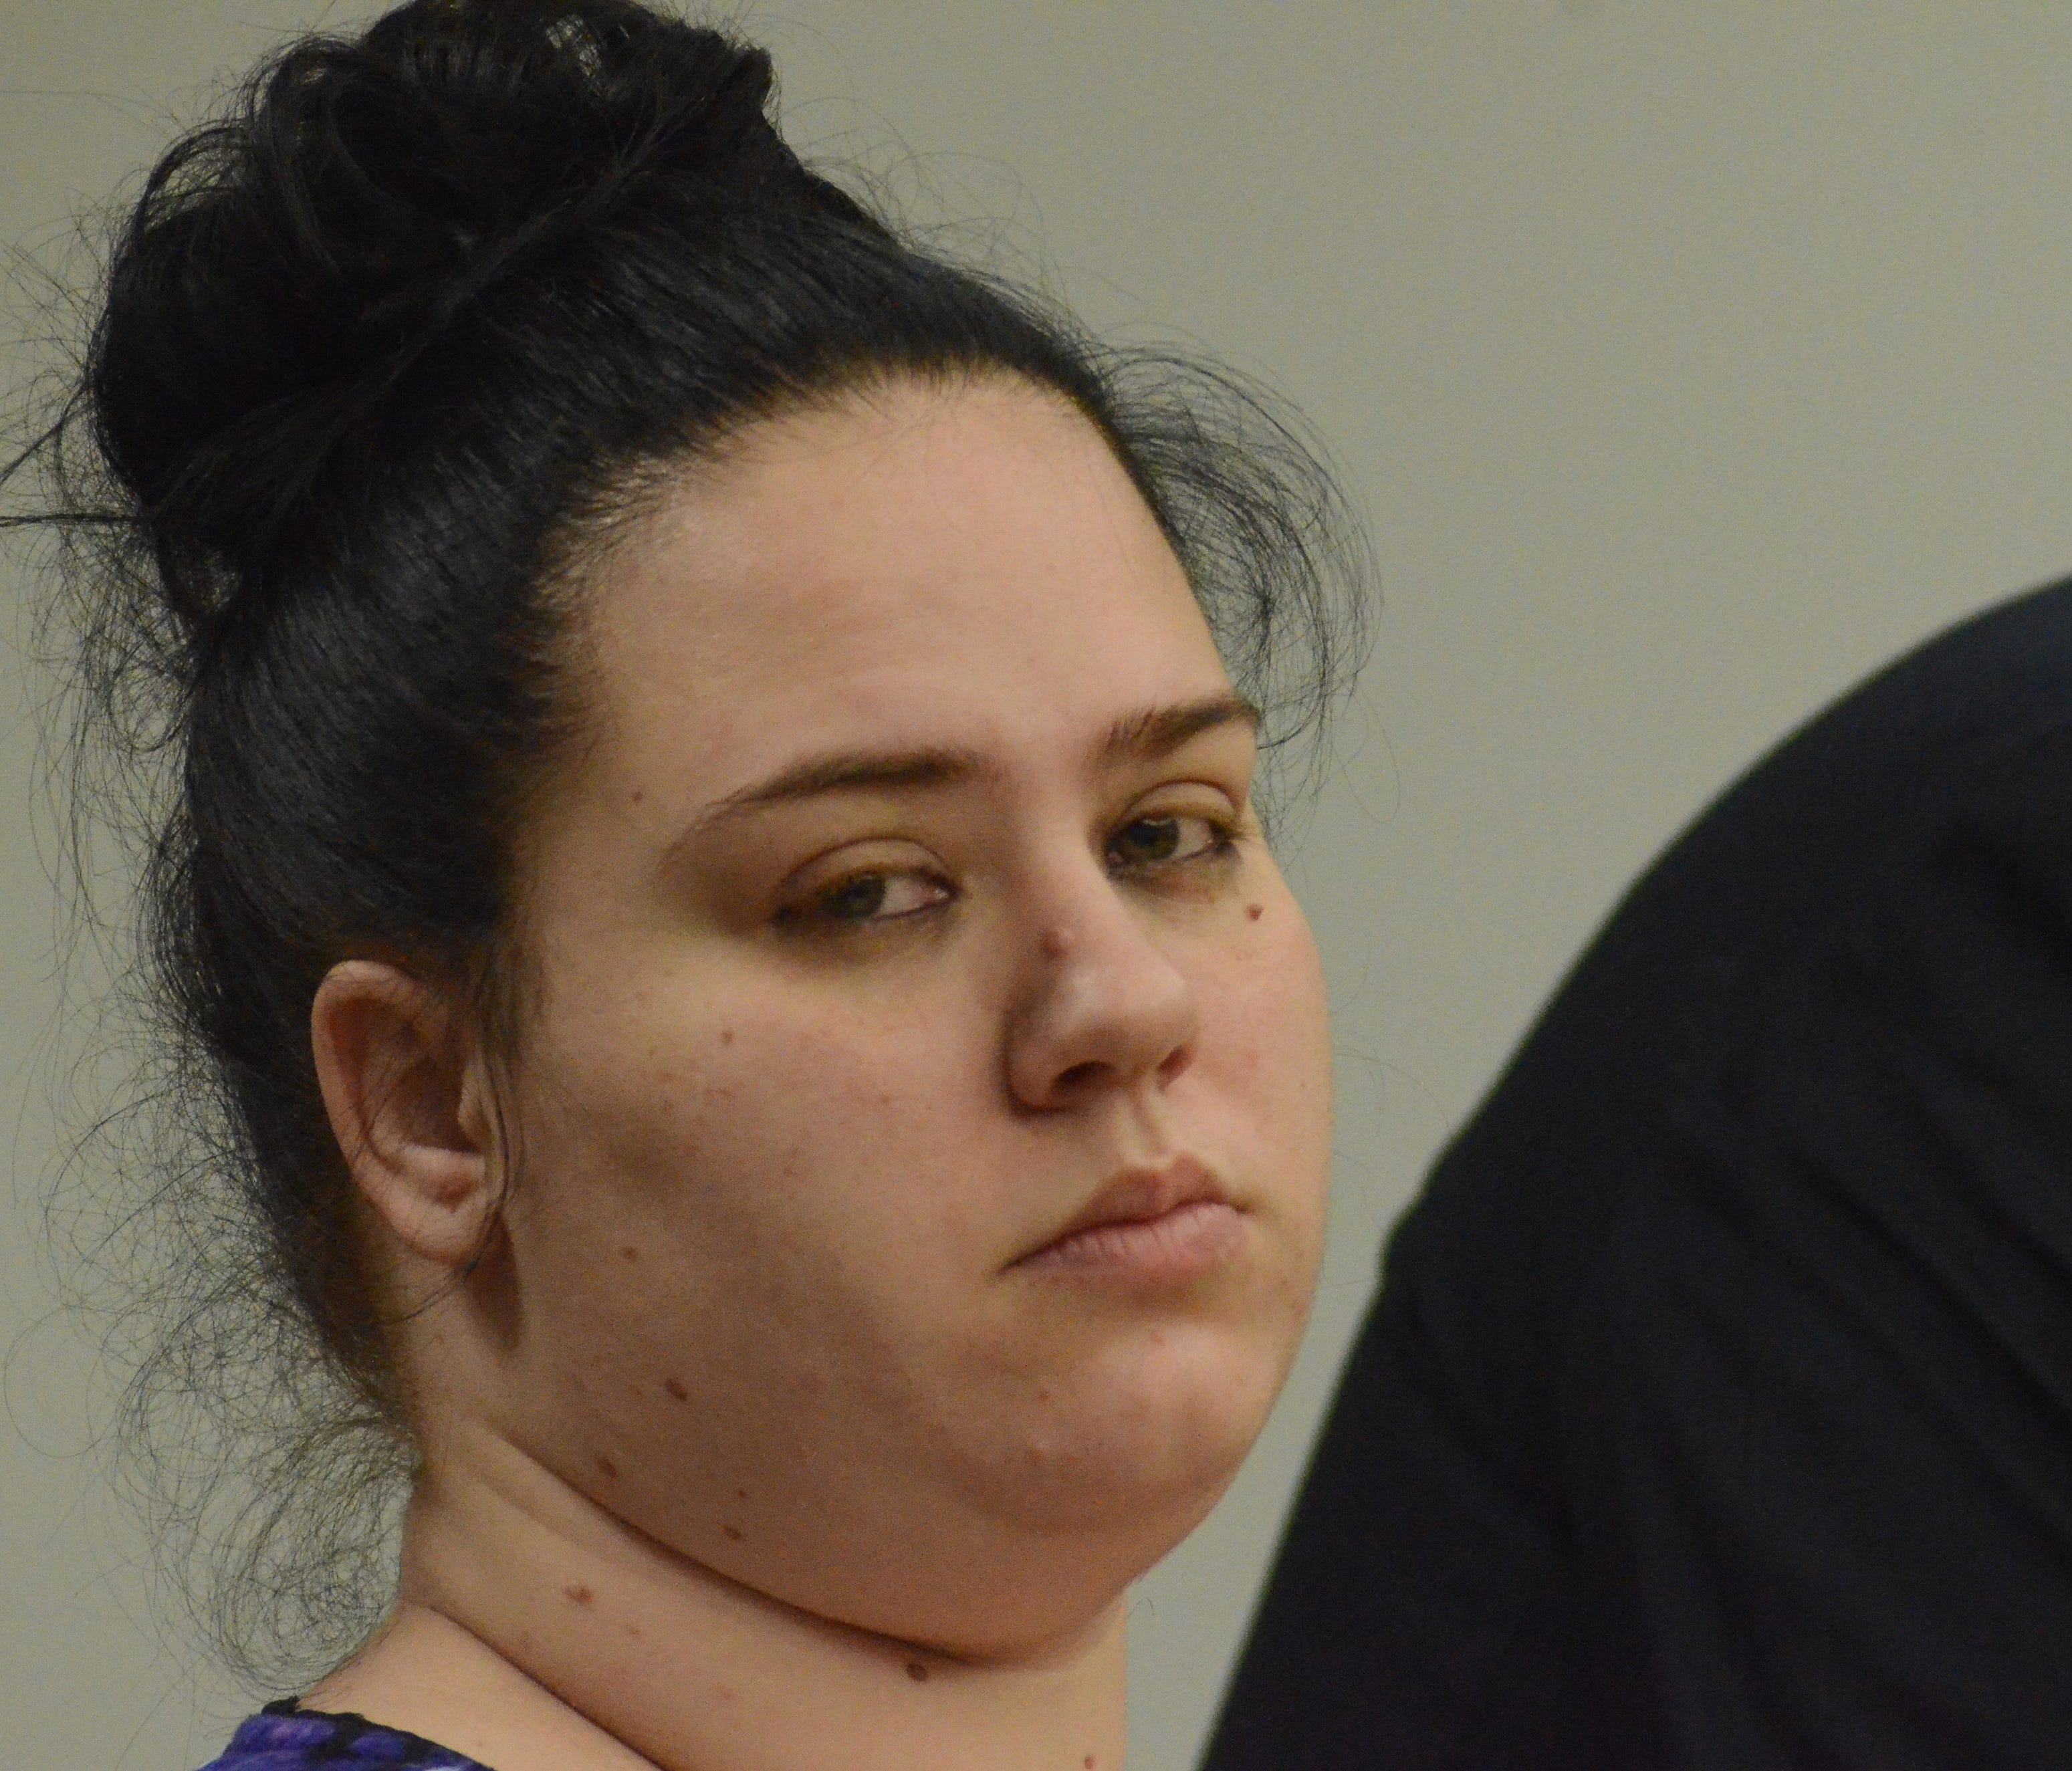 Megan Schug was sentenced May 18 to 25 to 50 years for child abuse.